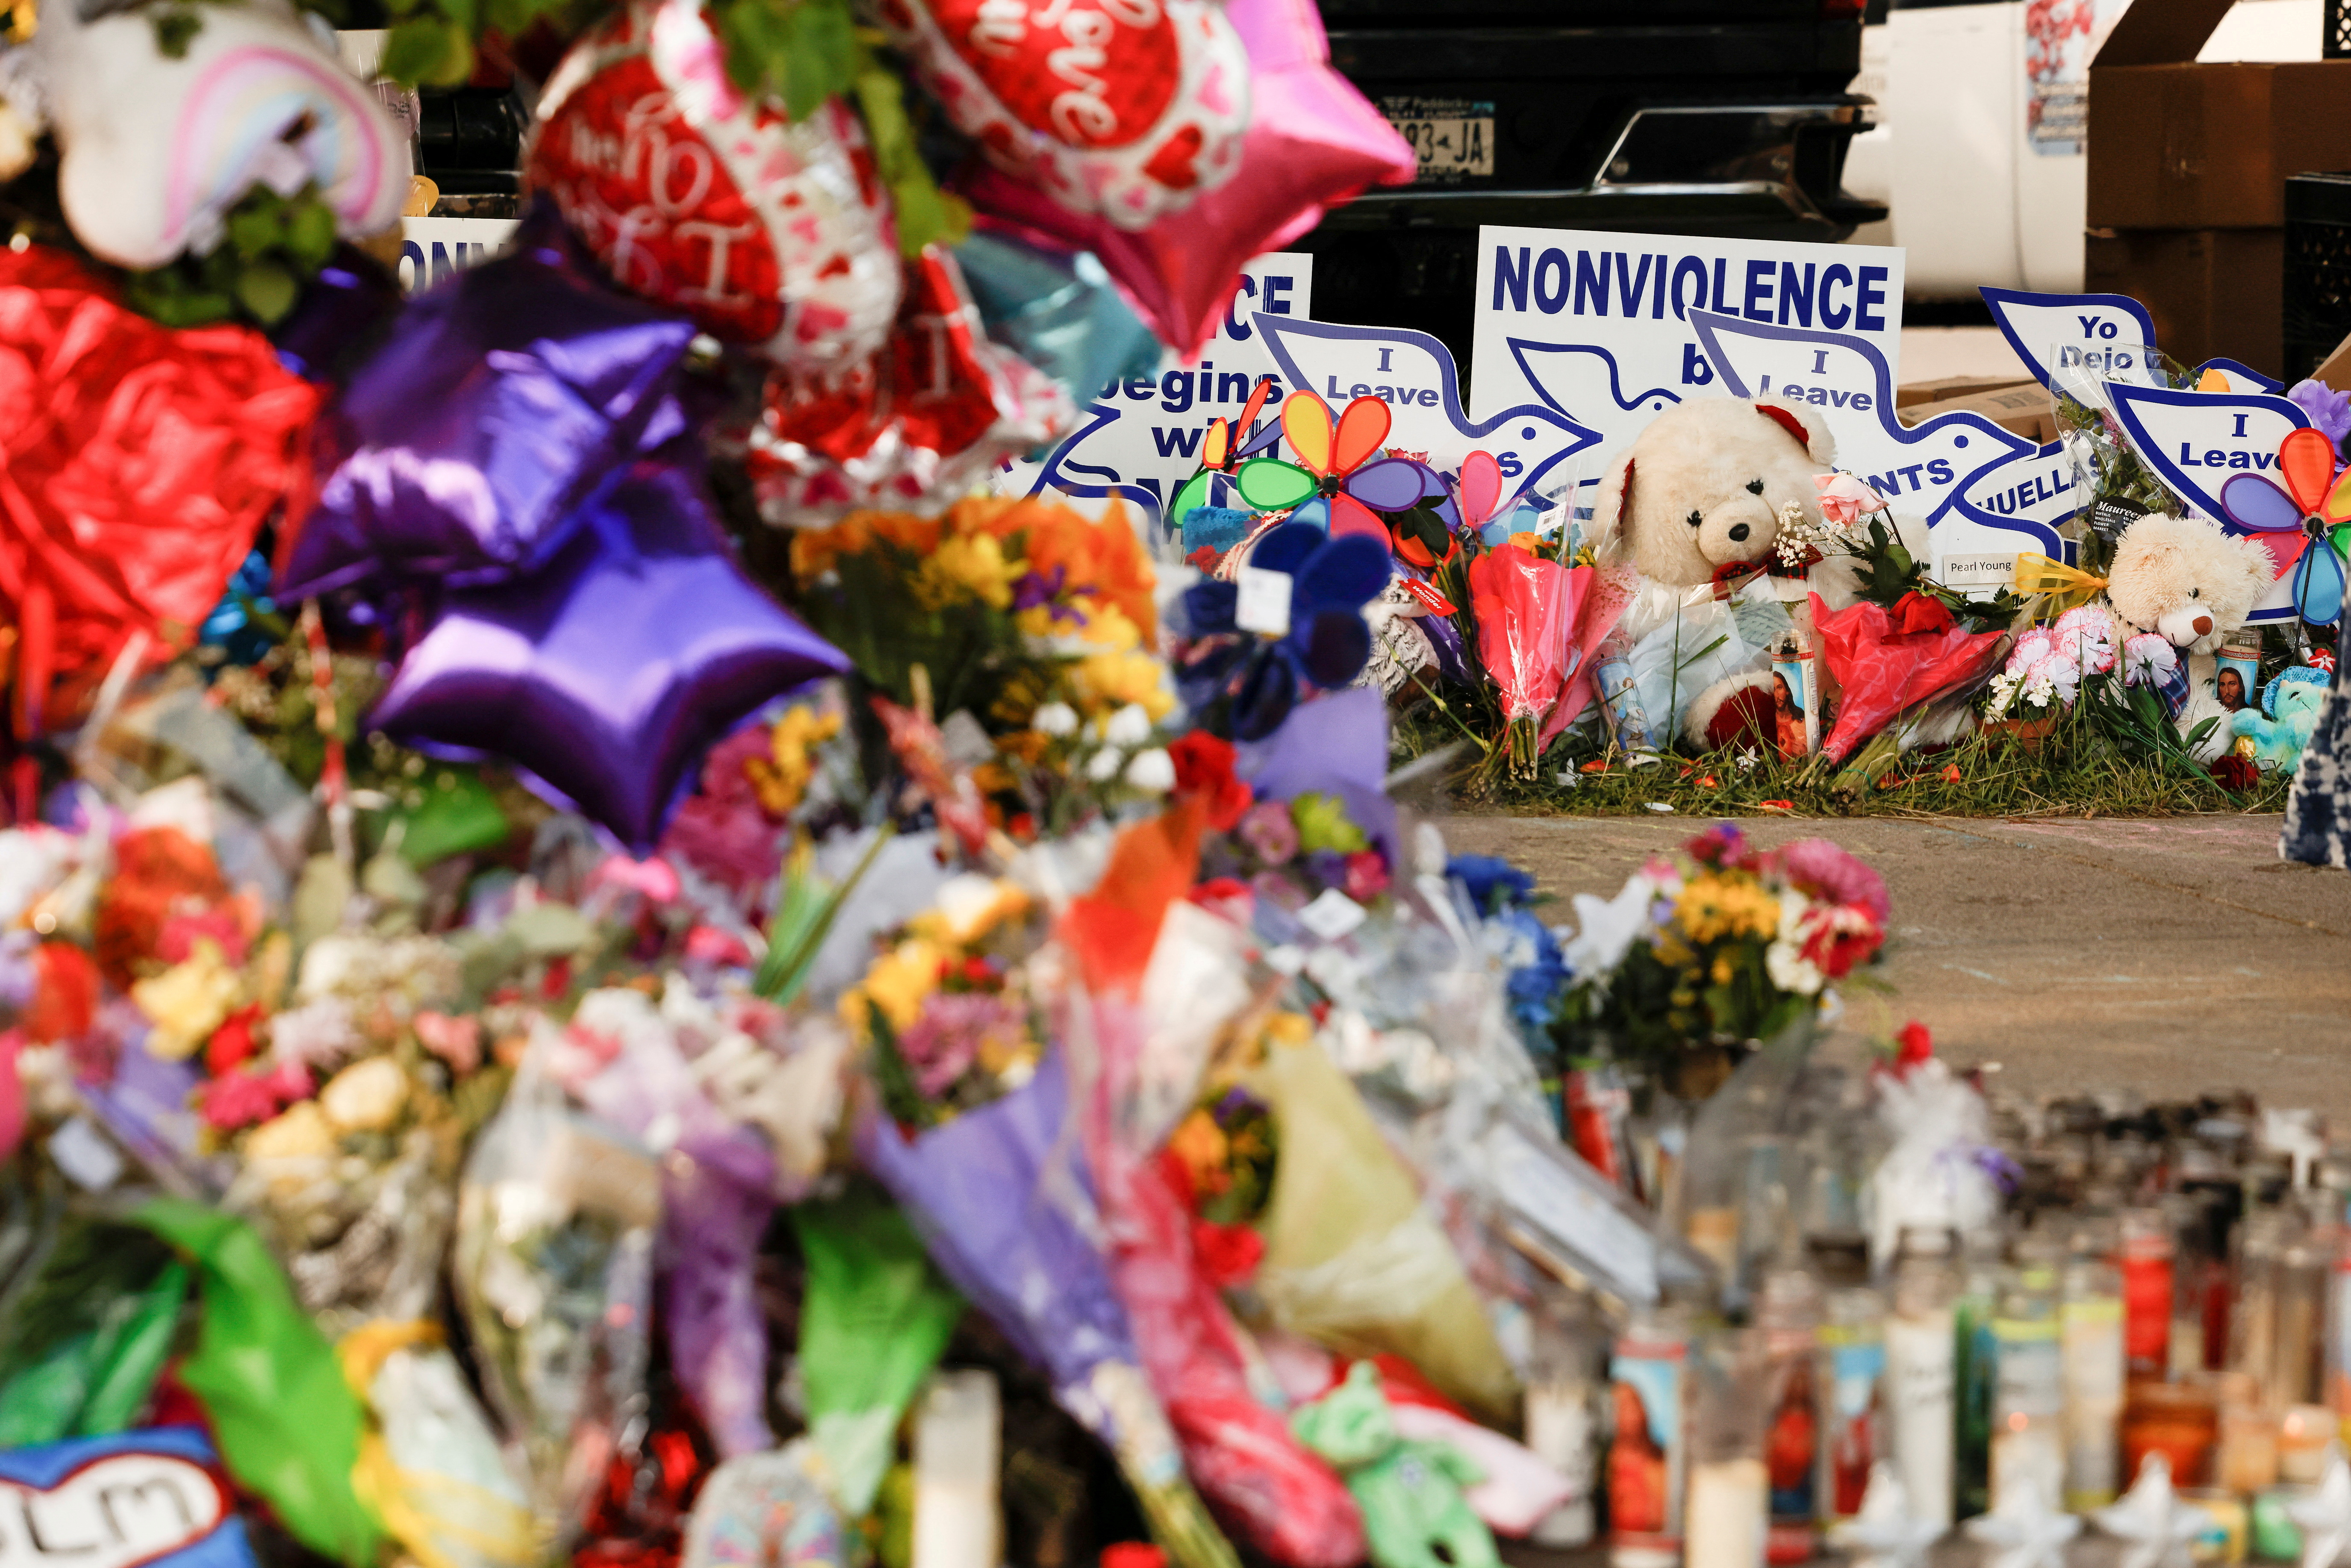 A memorial at the scene of a weekend shooting at a Tops supermarket in Buffalo, New York